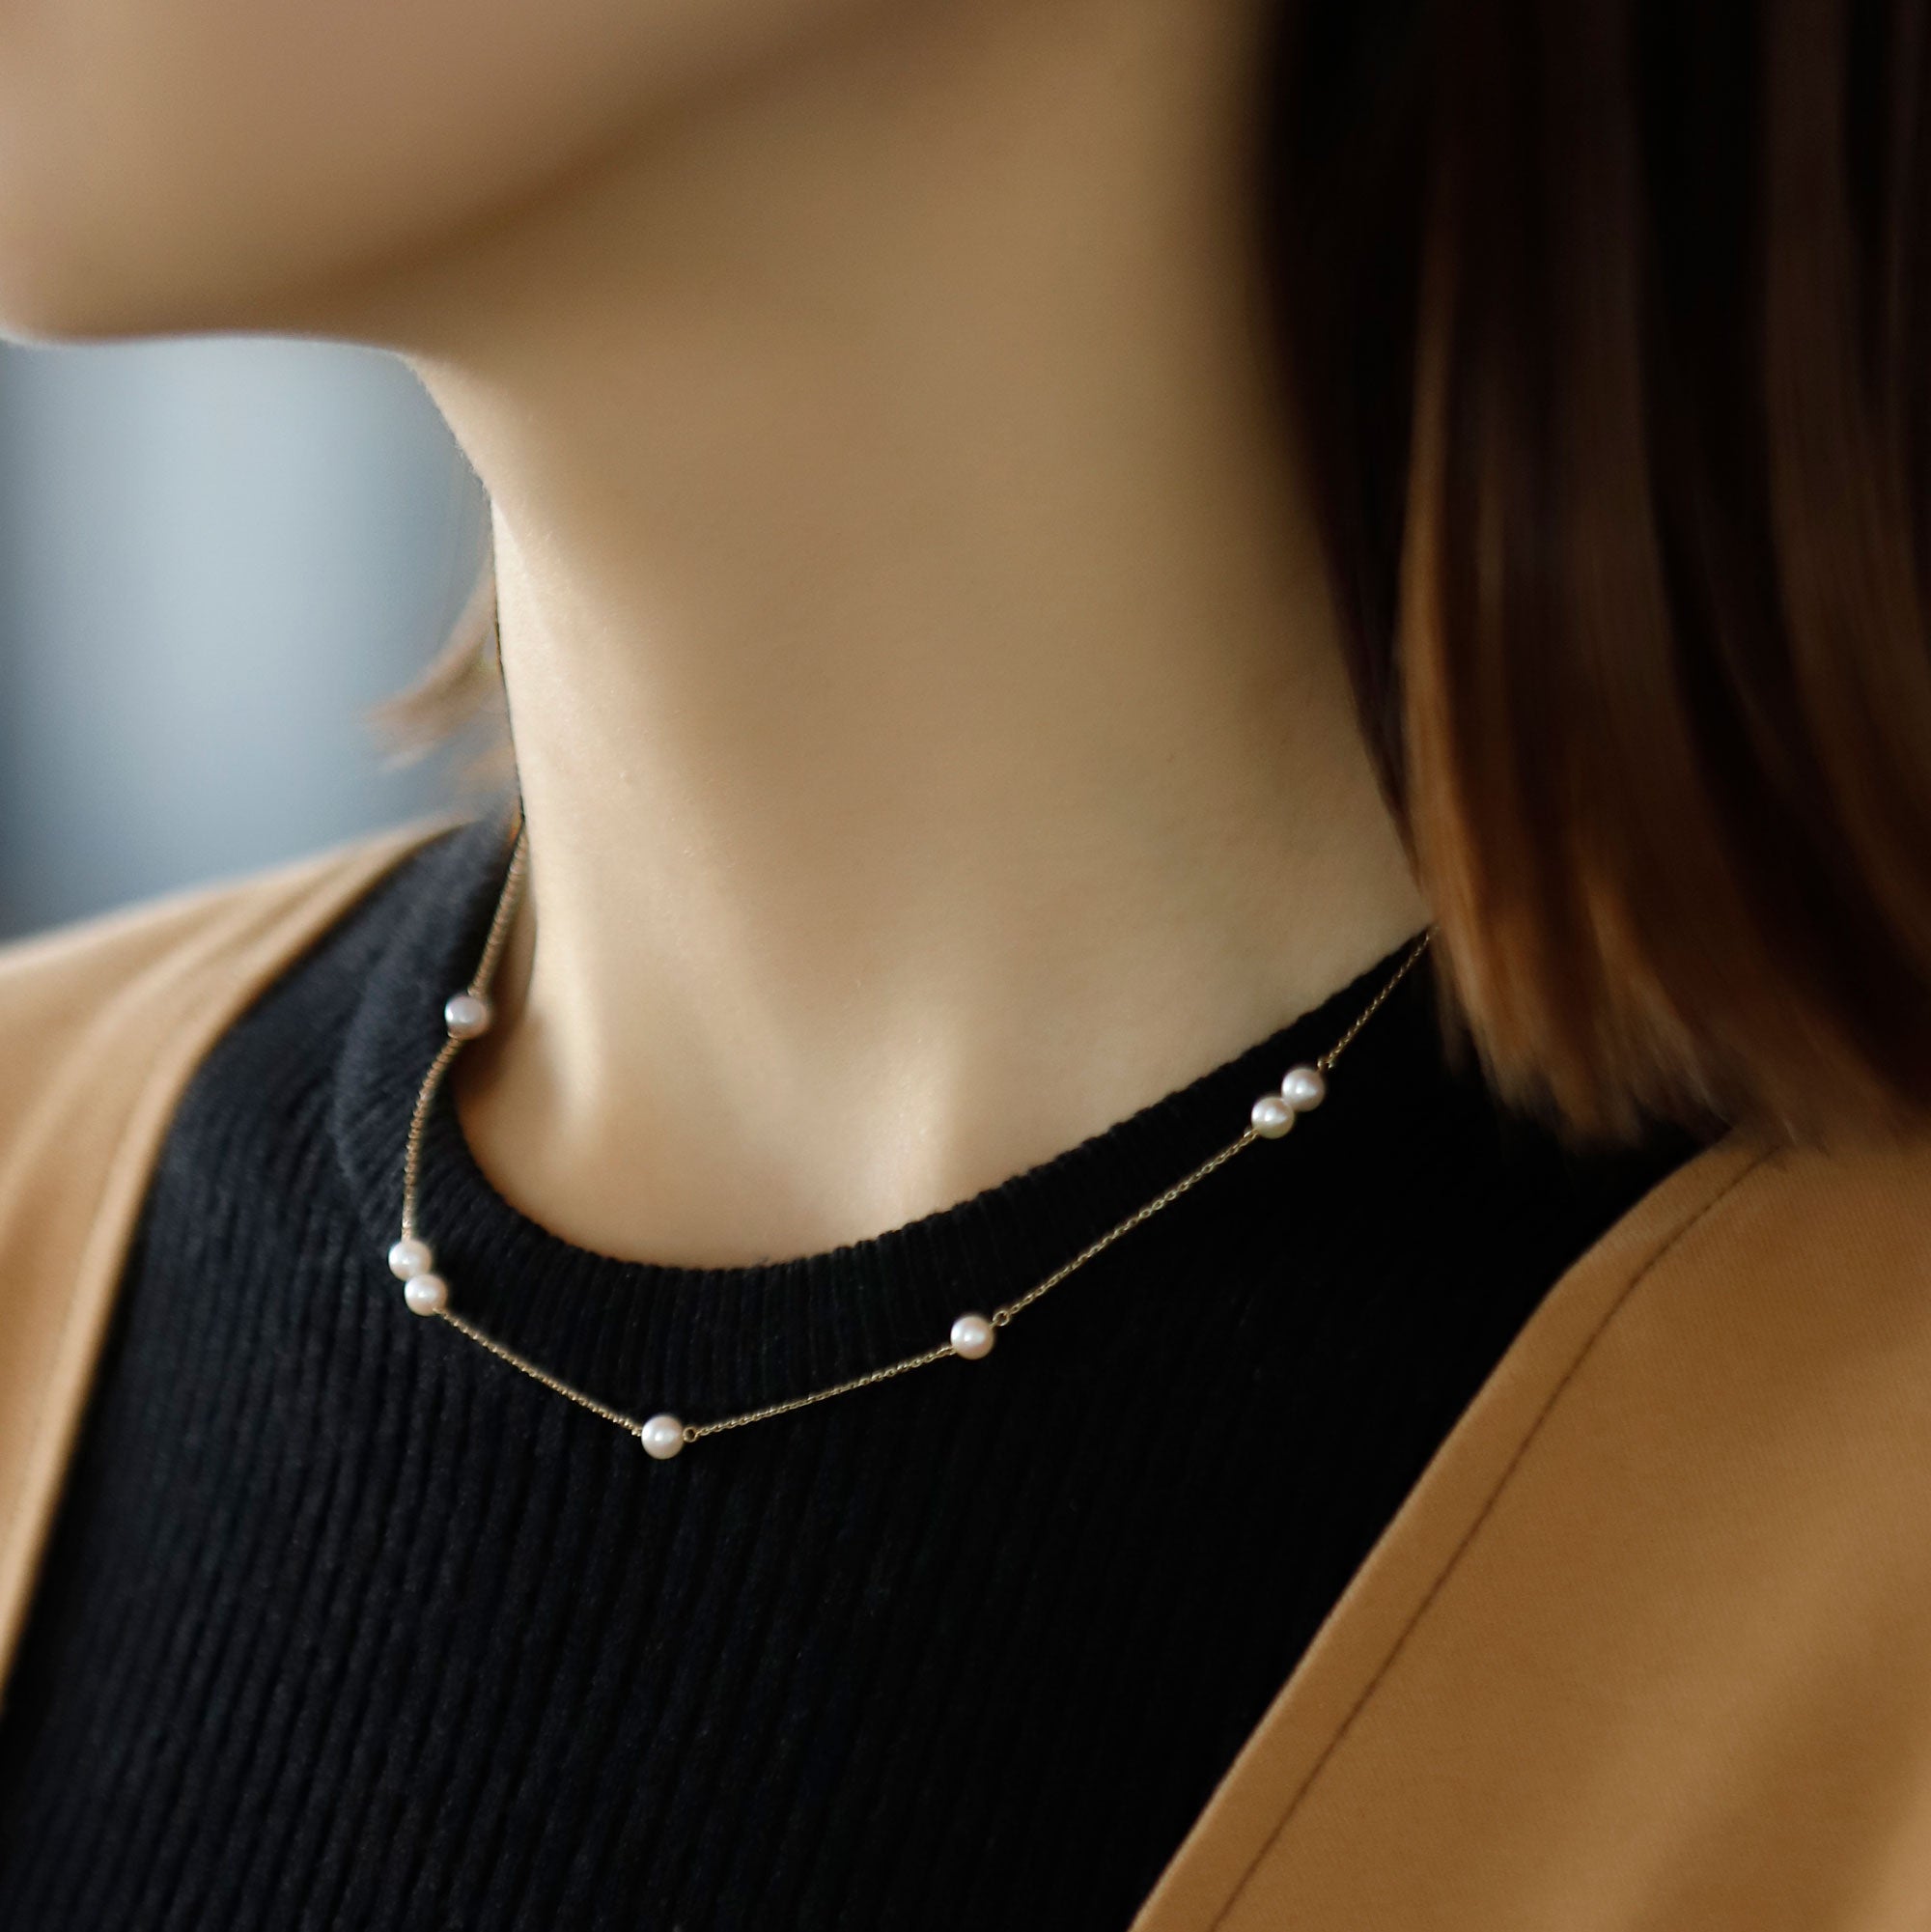 The necklace is a short type necklace with a total length of 37cm. We also recommend adding an adjuster to wear it longer.